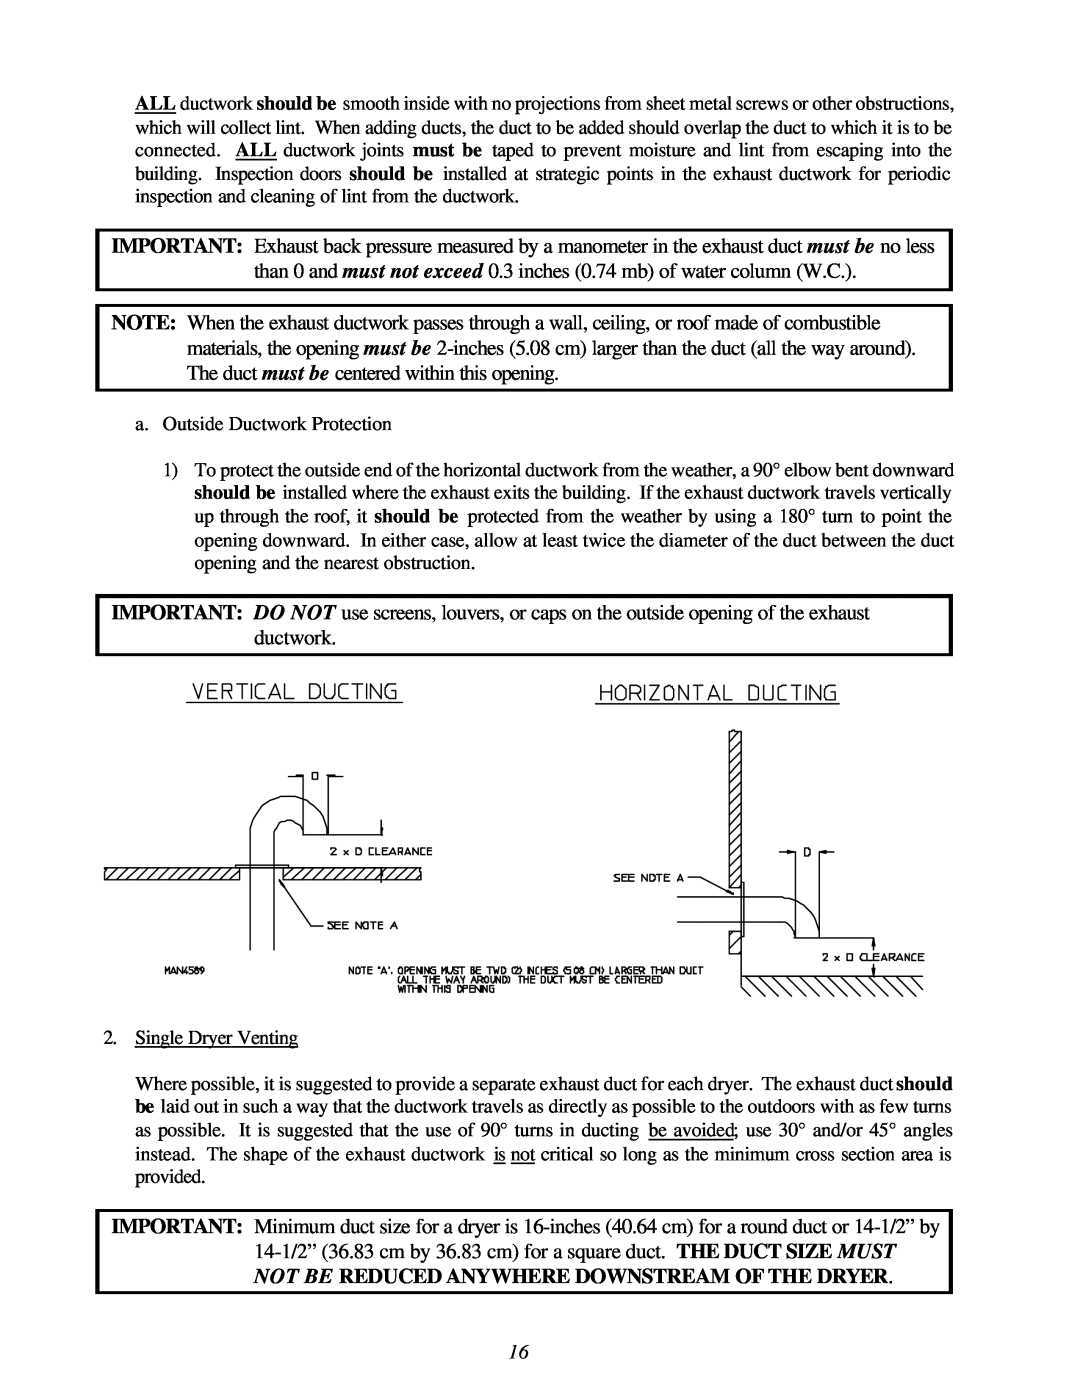 American Dryer Corp ML-122D installation manual a. Outside Ductwork Protection 